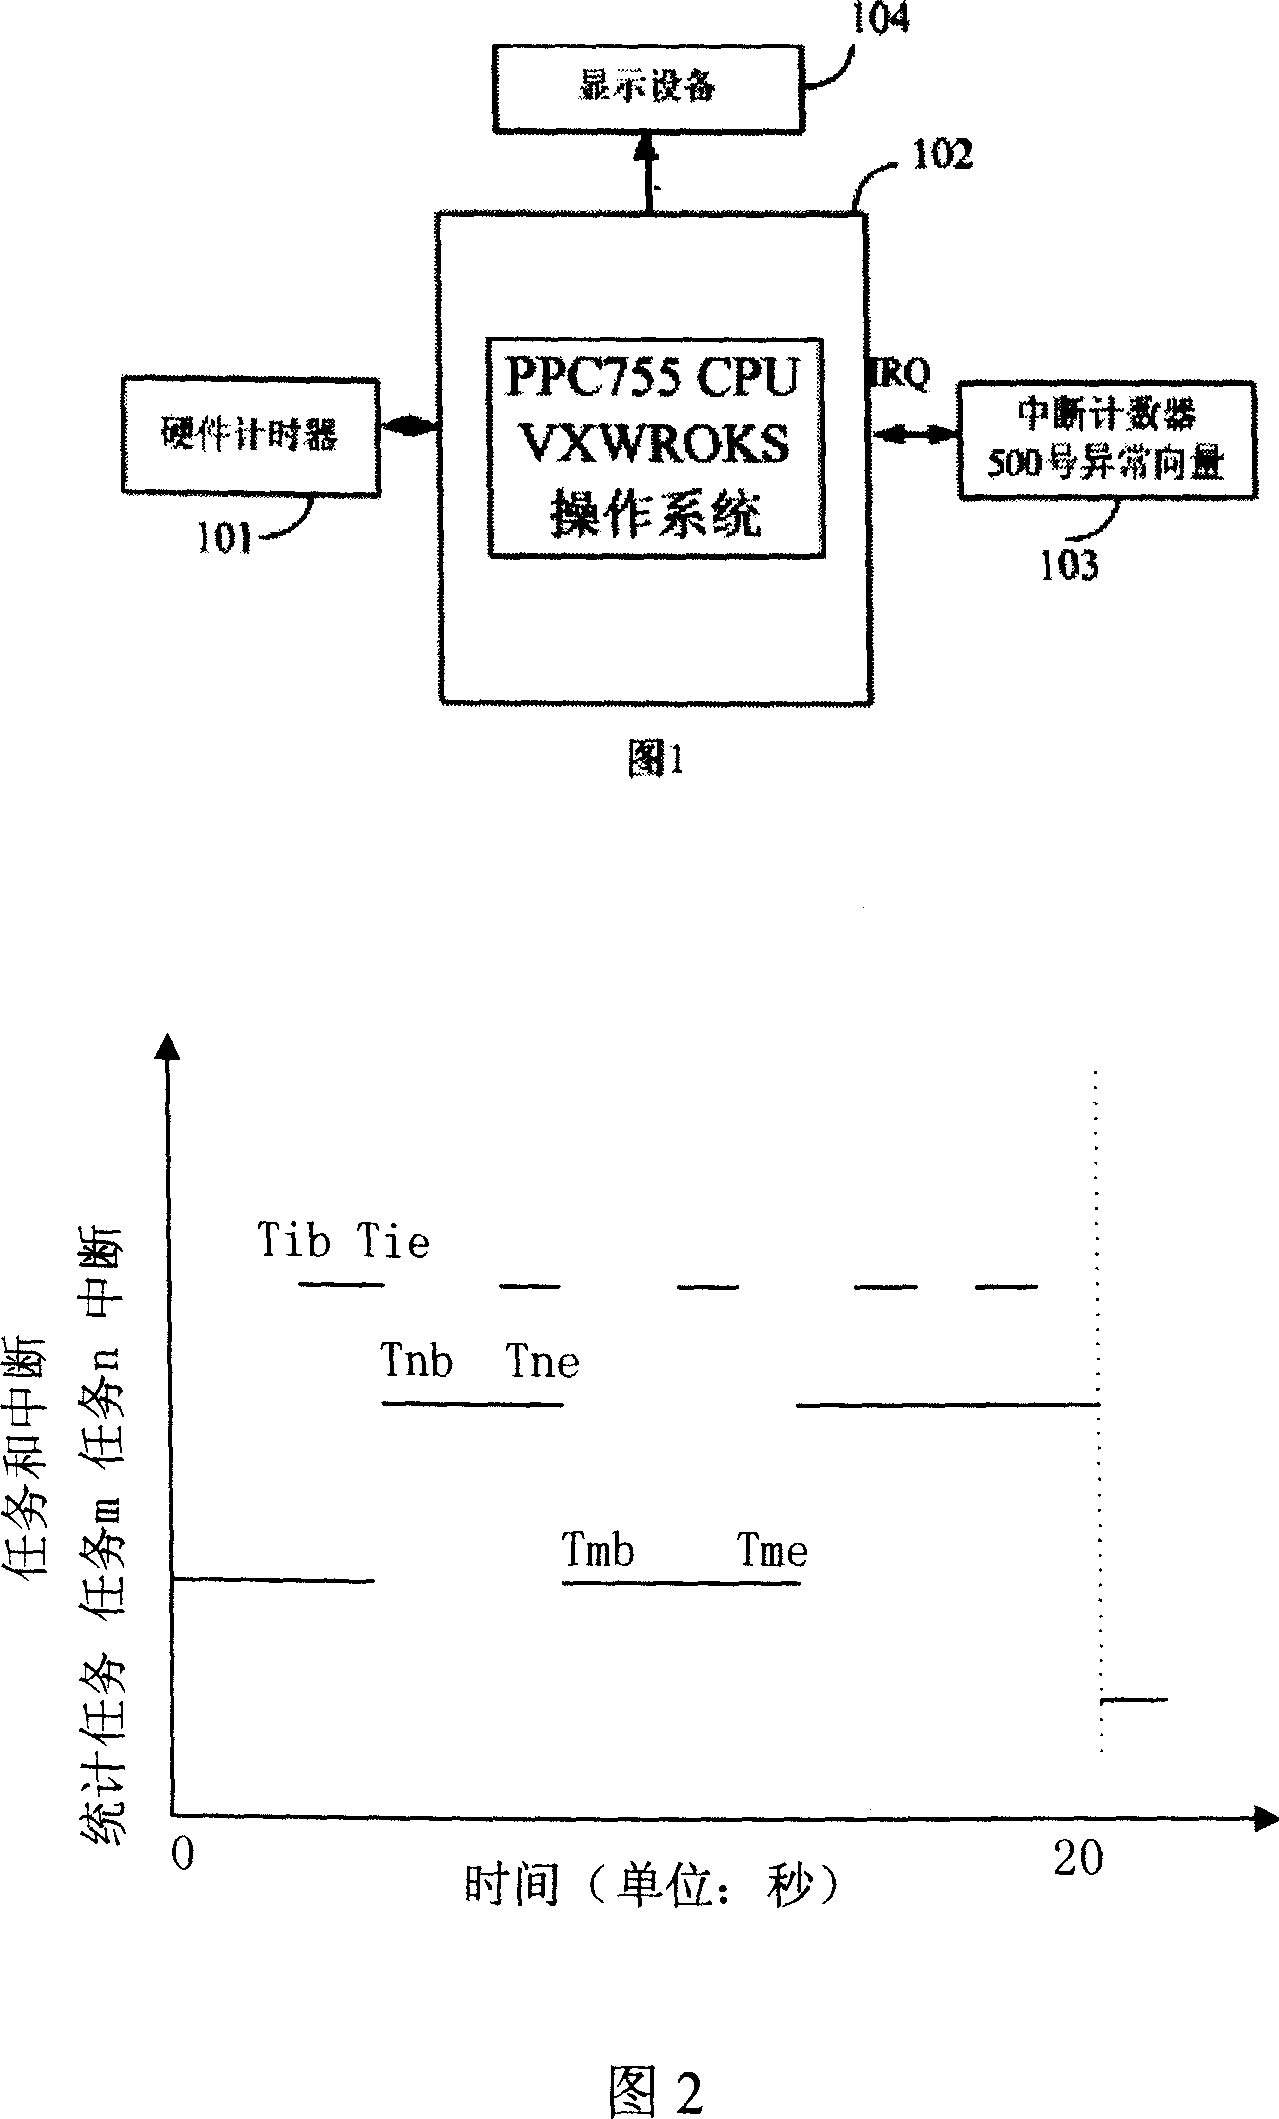 Method for measuring task CPU occupancy rate in multitasking operation system